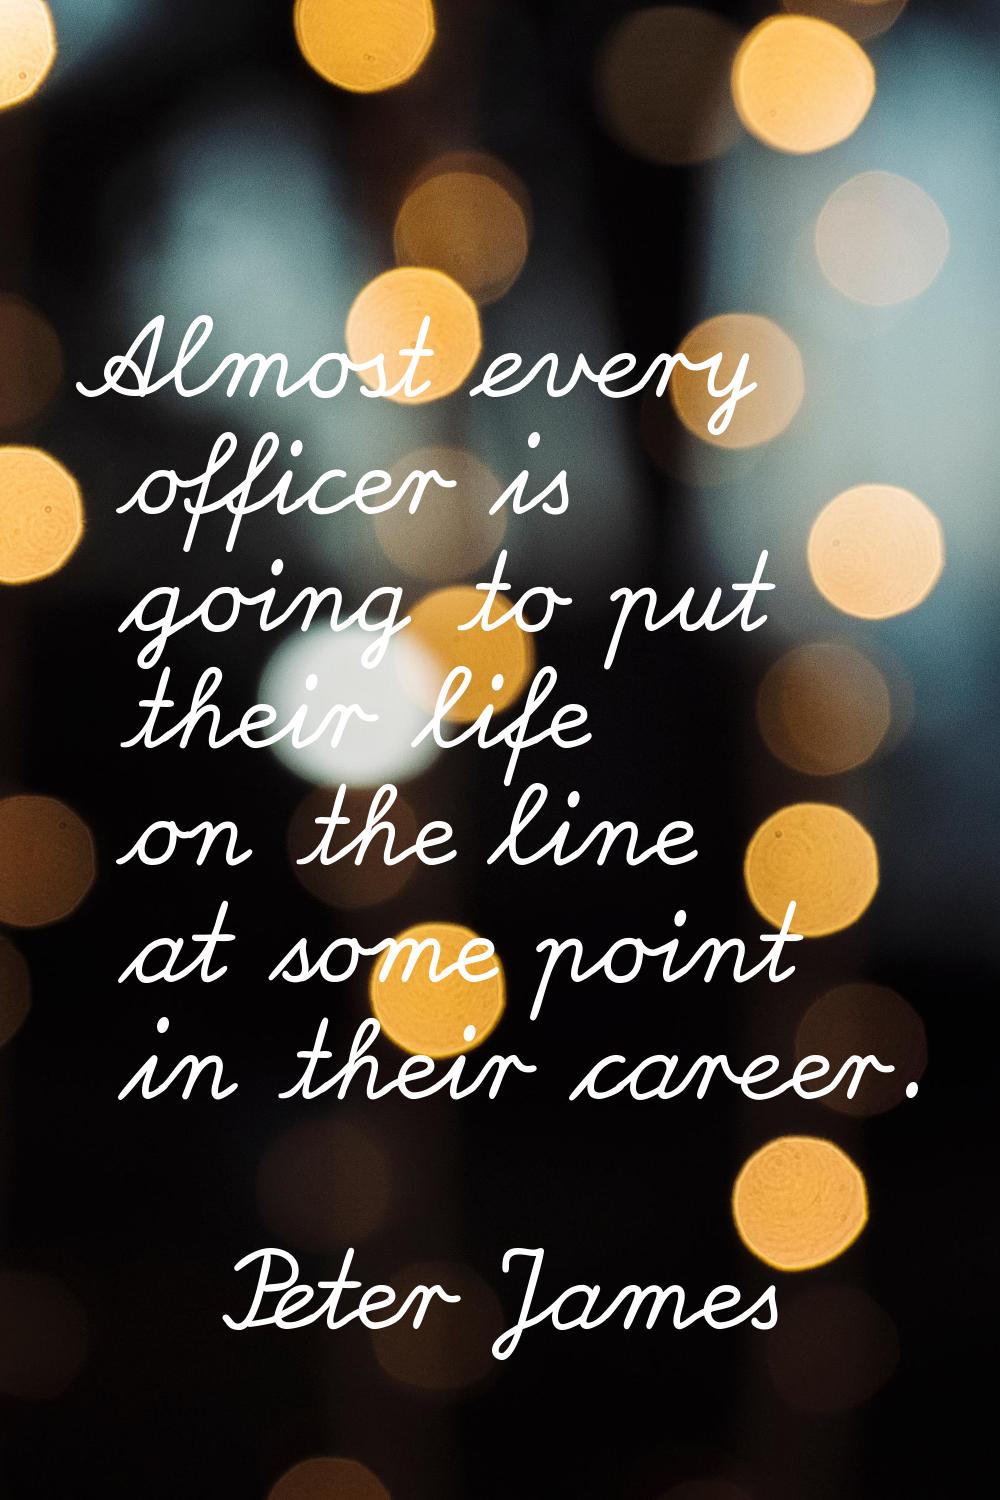 Almost every officer is going to put their life on the line at some point in their career.